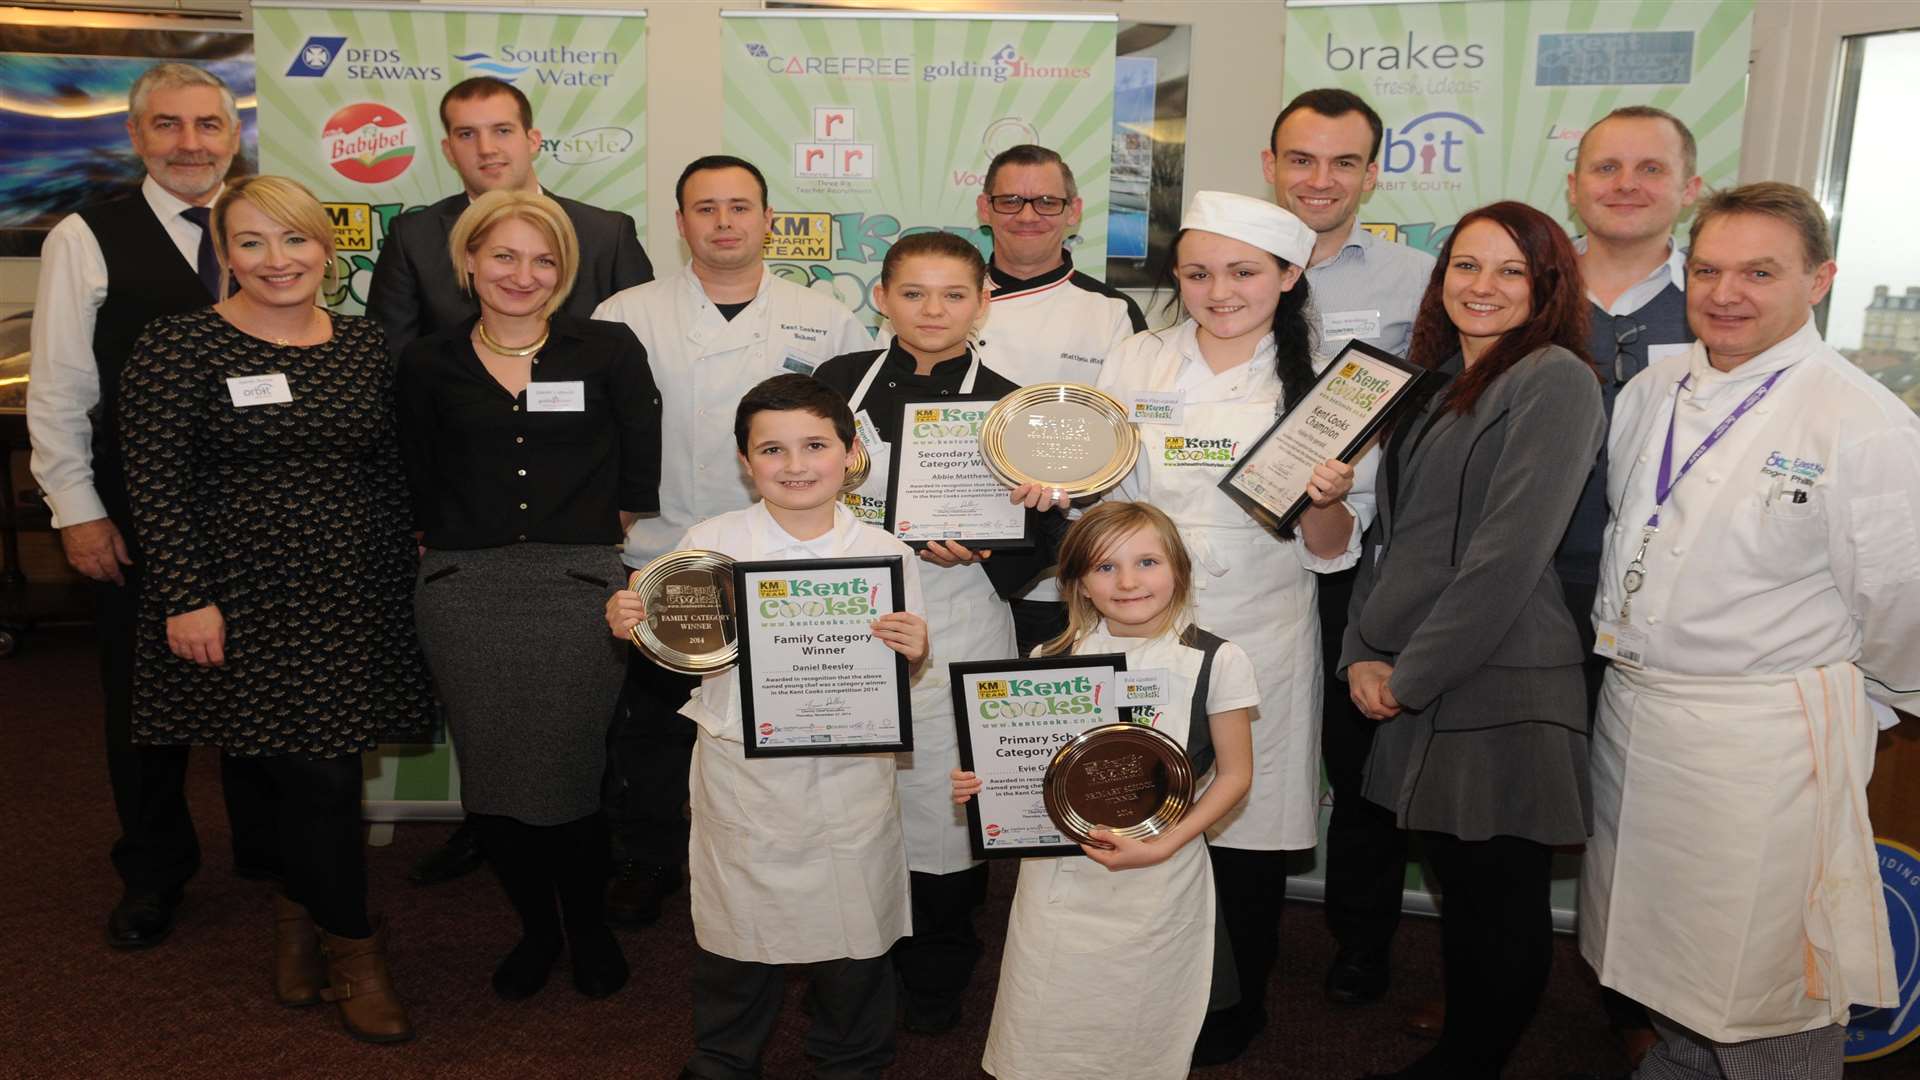 Kent Cooks 2014 winners celebrate with the event's partners which include Licensing Consultancy Services, VooServers, Golding Homes, Kent Cookery School, DFDS Seaways, Orbit South, East Kent College, Countrystyle, Mini Babybel, Brakes, Carefree Communication and Three R's Teacher Recruitment